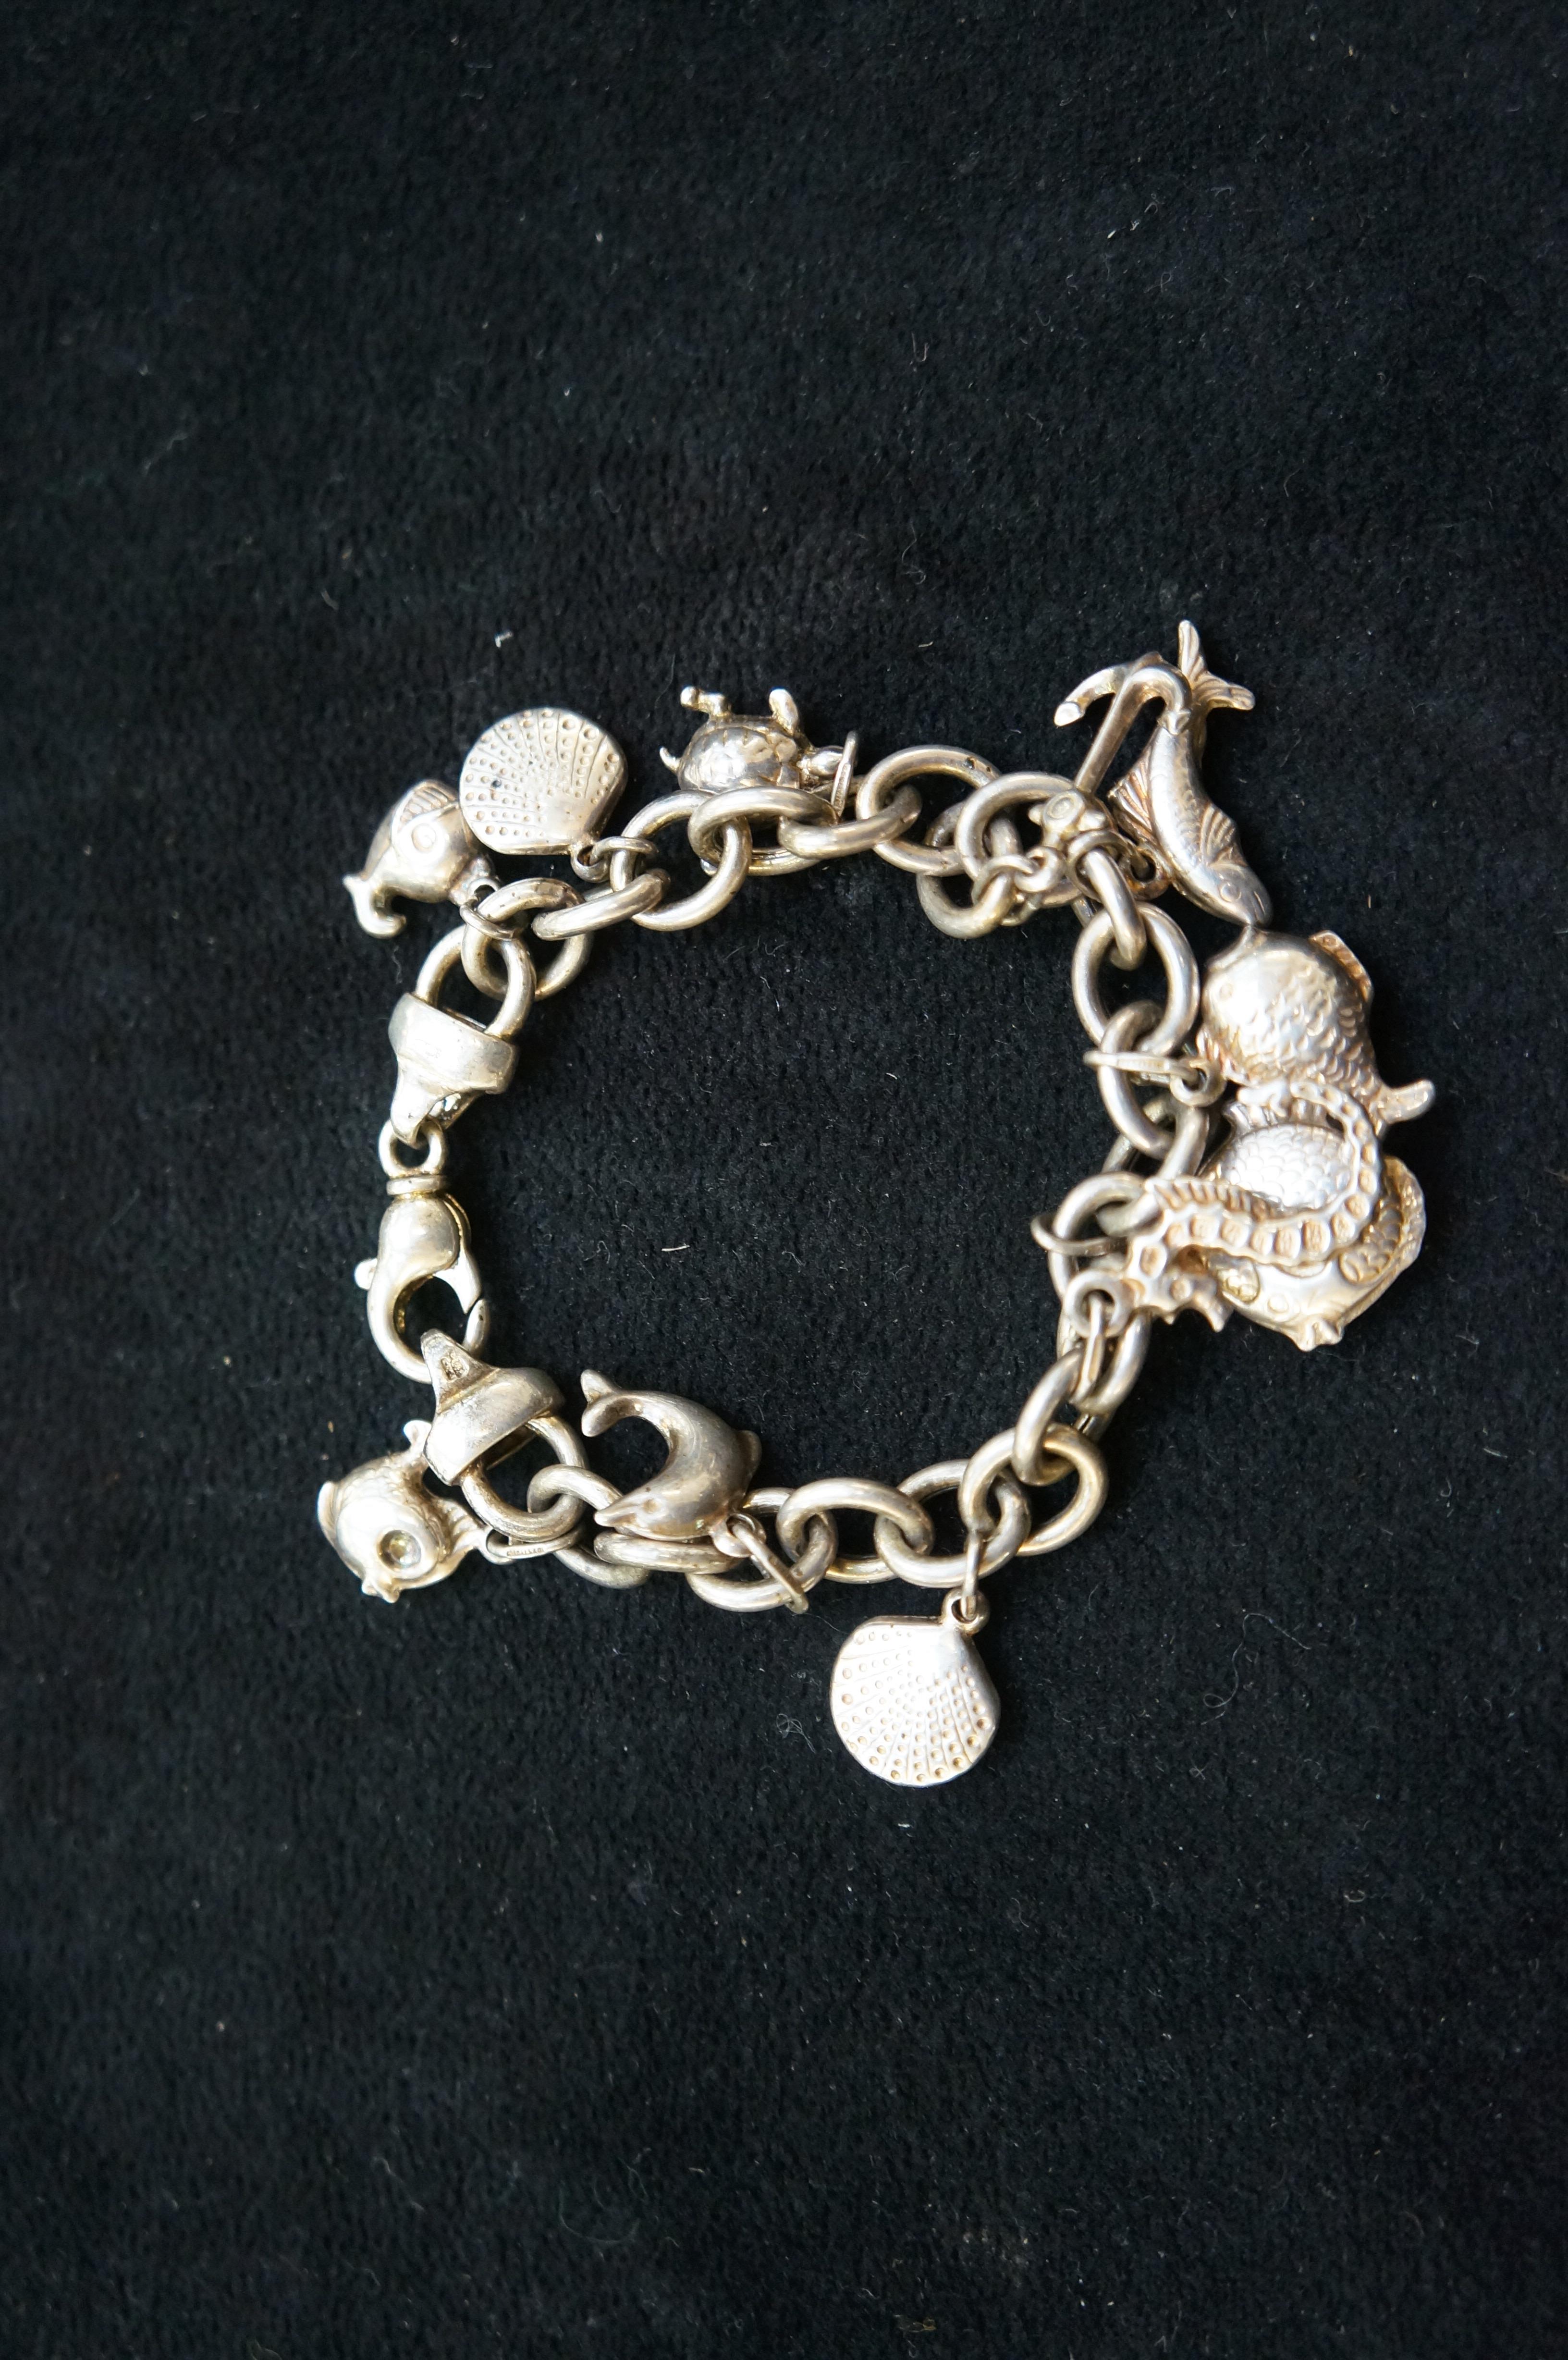 Silver charm bracelet with 11 charms